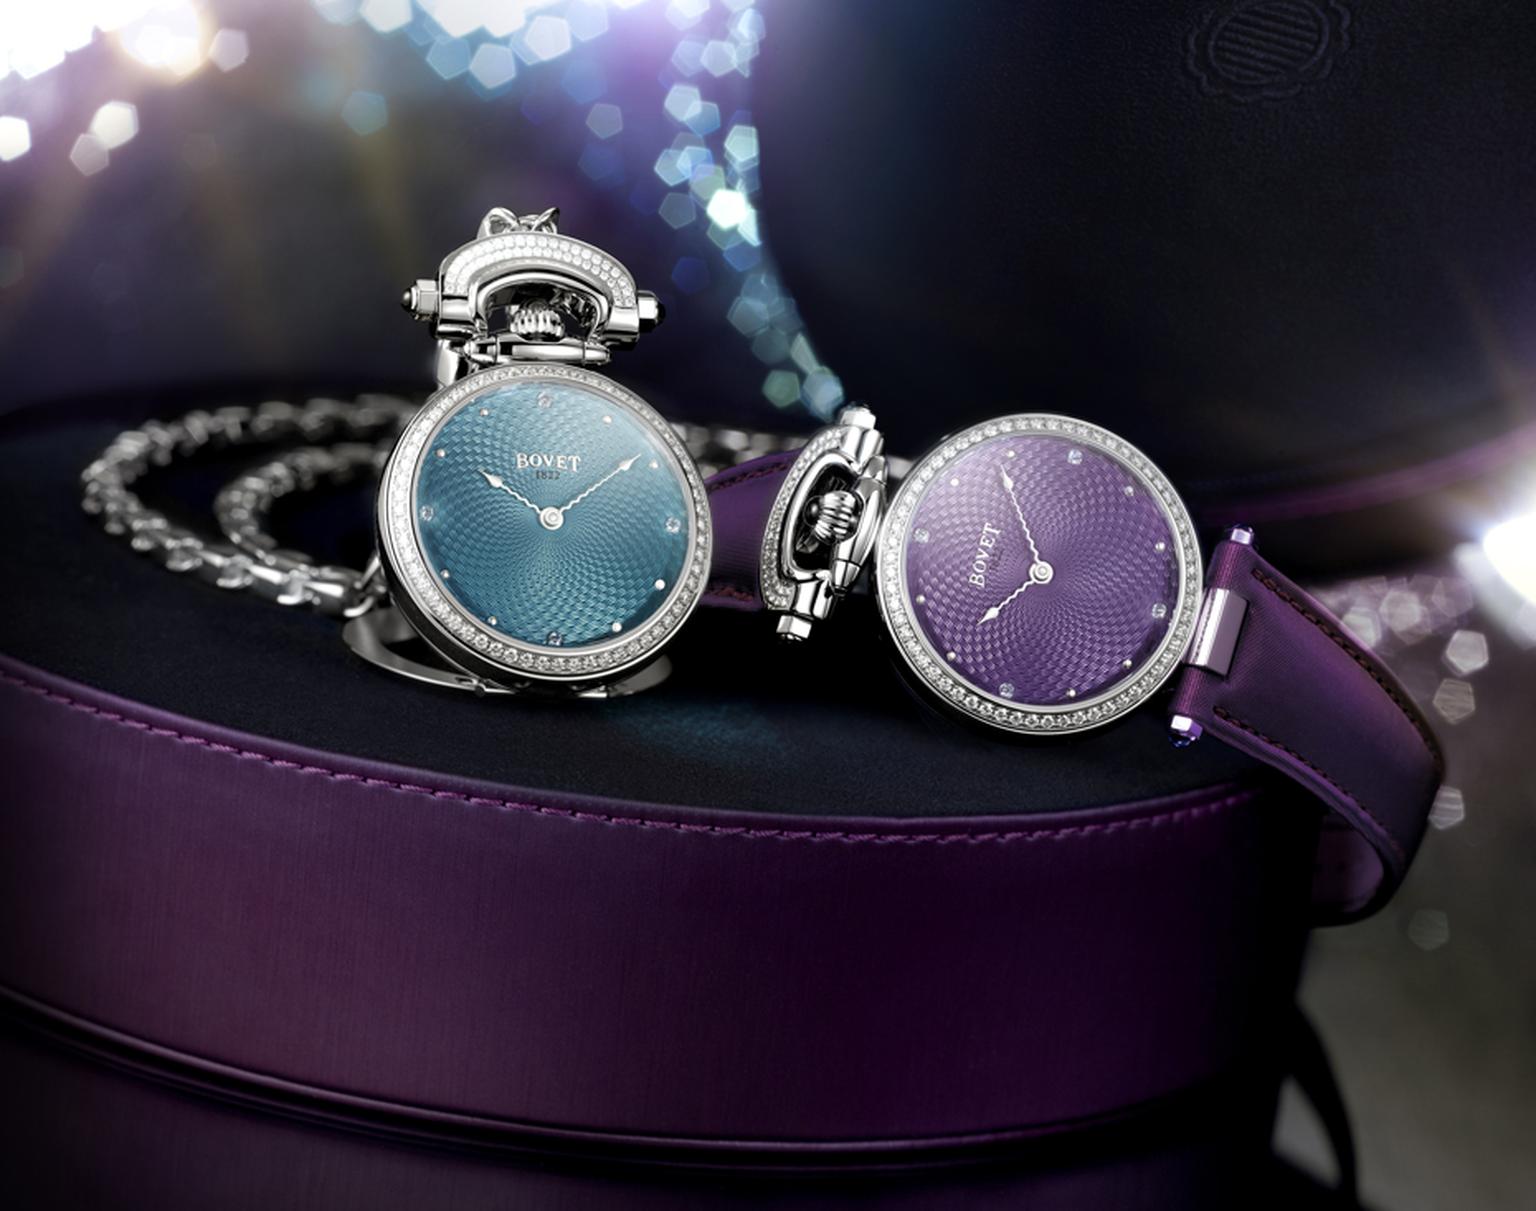 Bovet's Amadeo Fleurier 36 Miss Audrey watches, with their magnificent guilloché lacquered dials, are the lightest in the Fleurier collection, which allows them to be worn comfortably as a pendant.